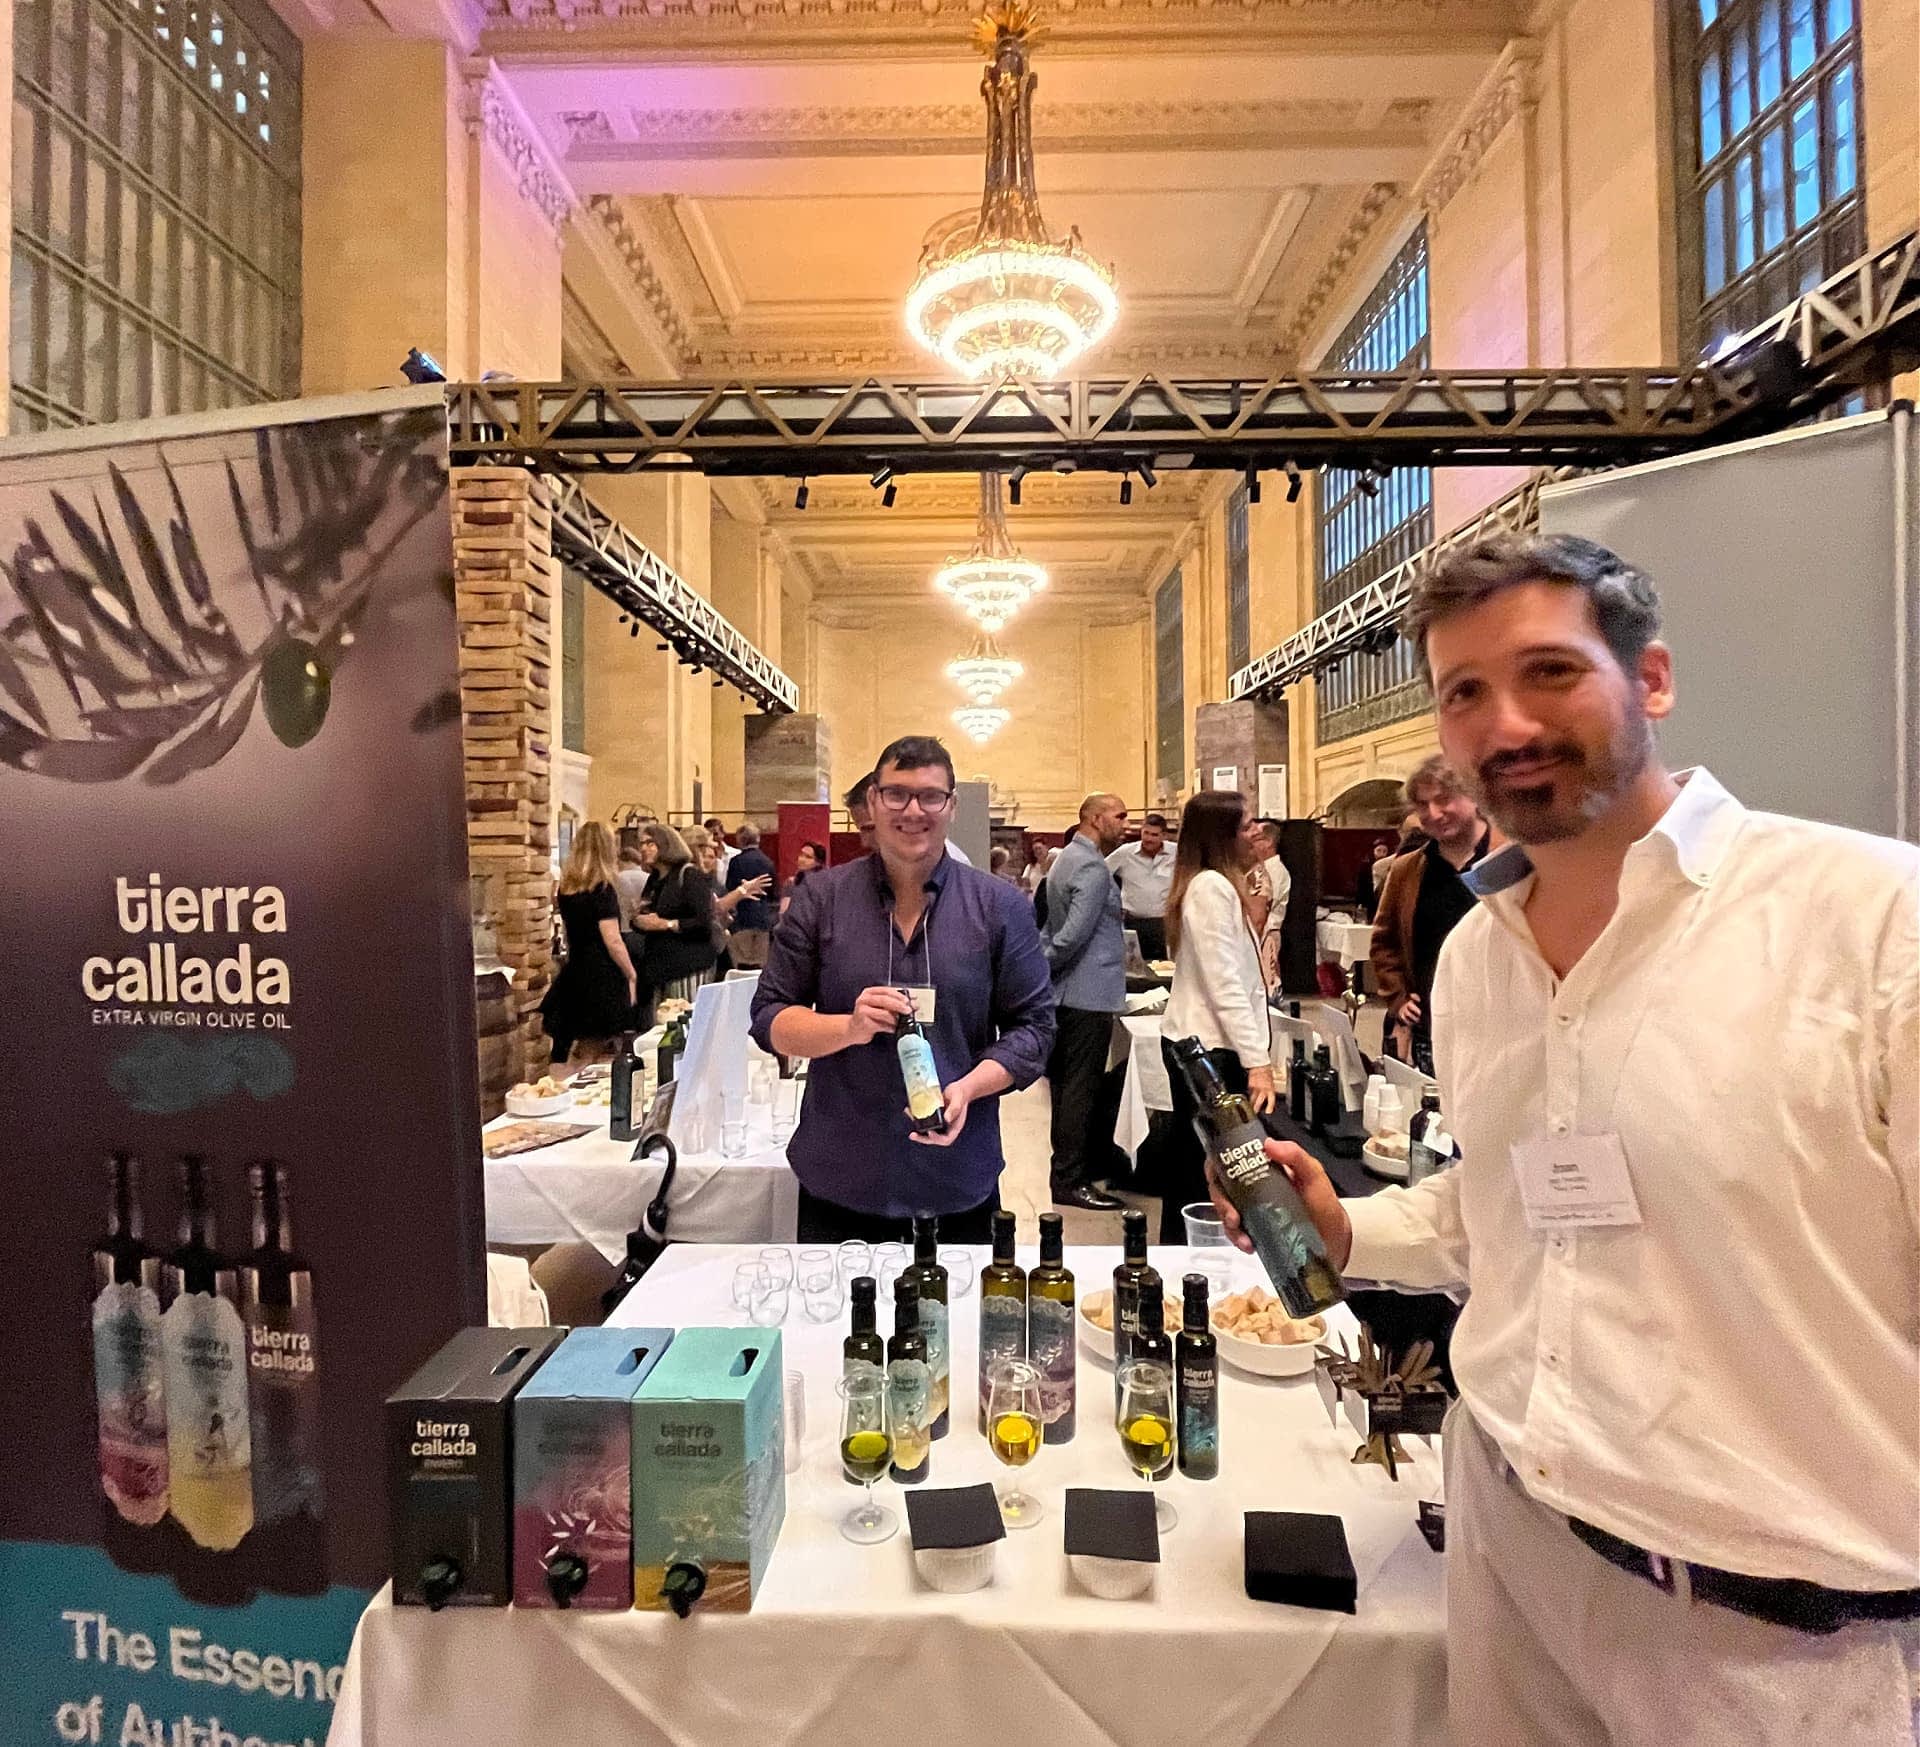 trade-events-business-north-america-trade-group-highlights-sustainability-at-manhattan-tasting-event-olive-oil-times